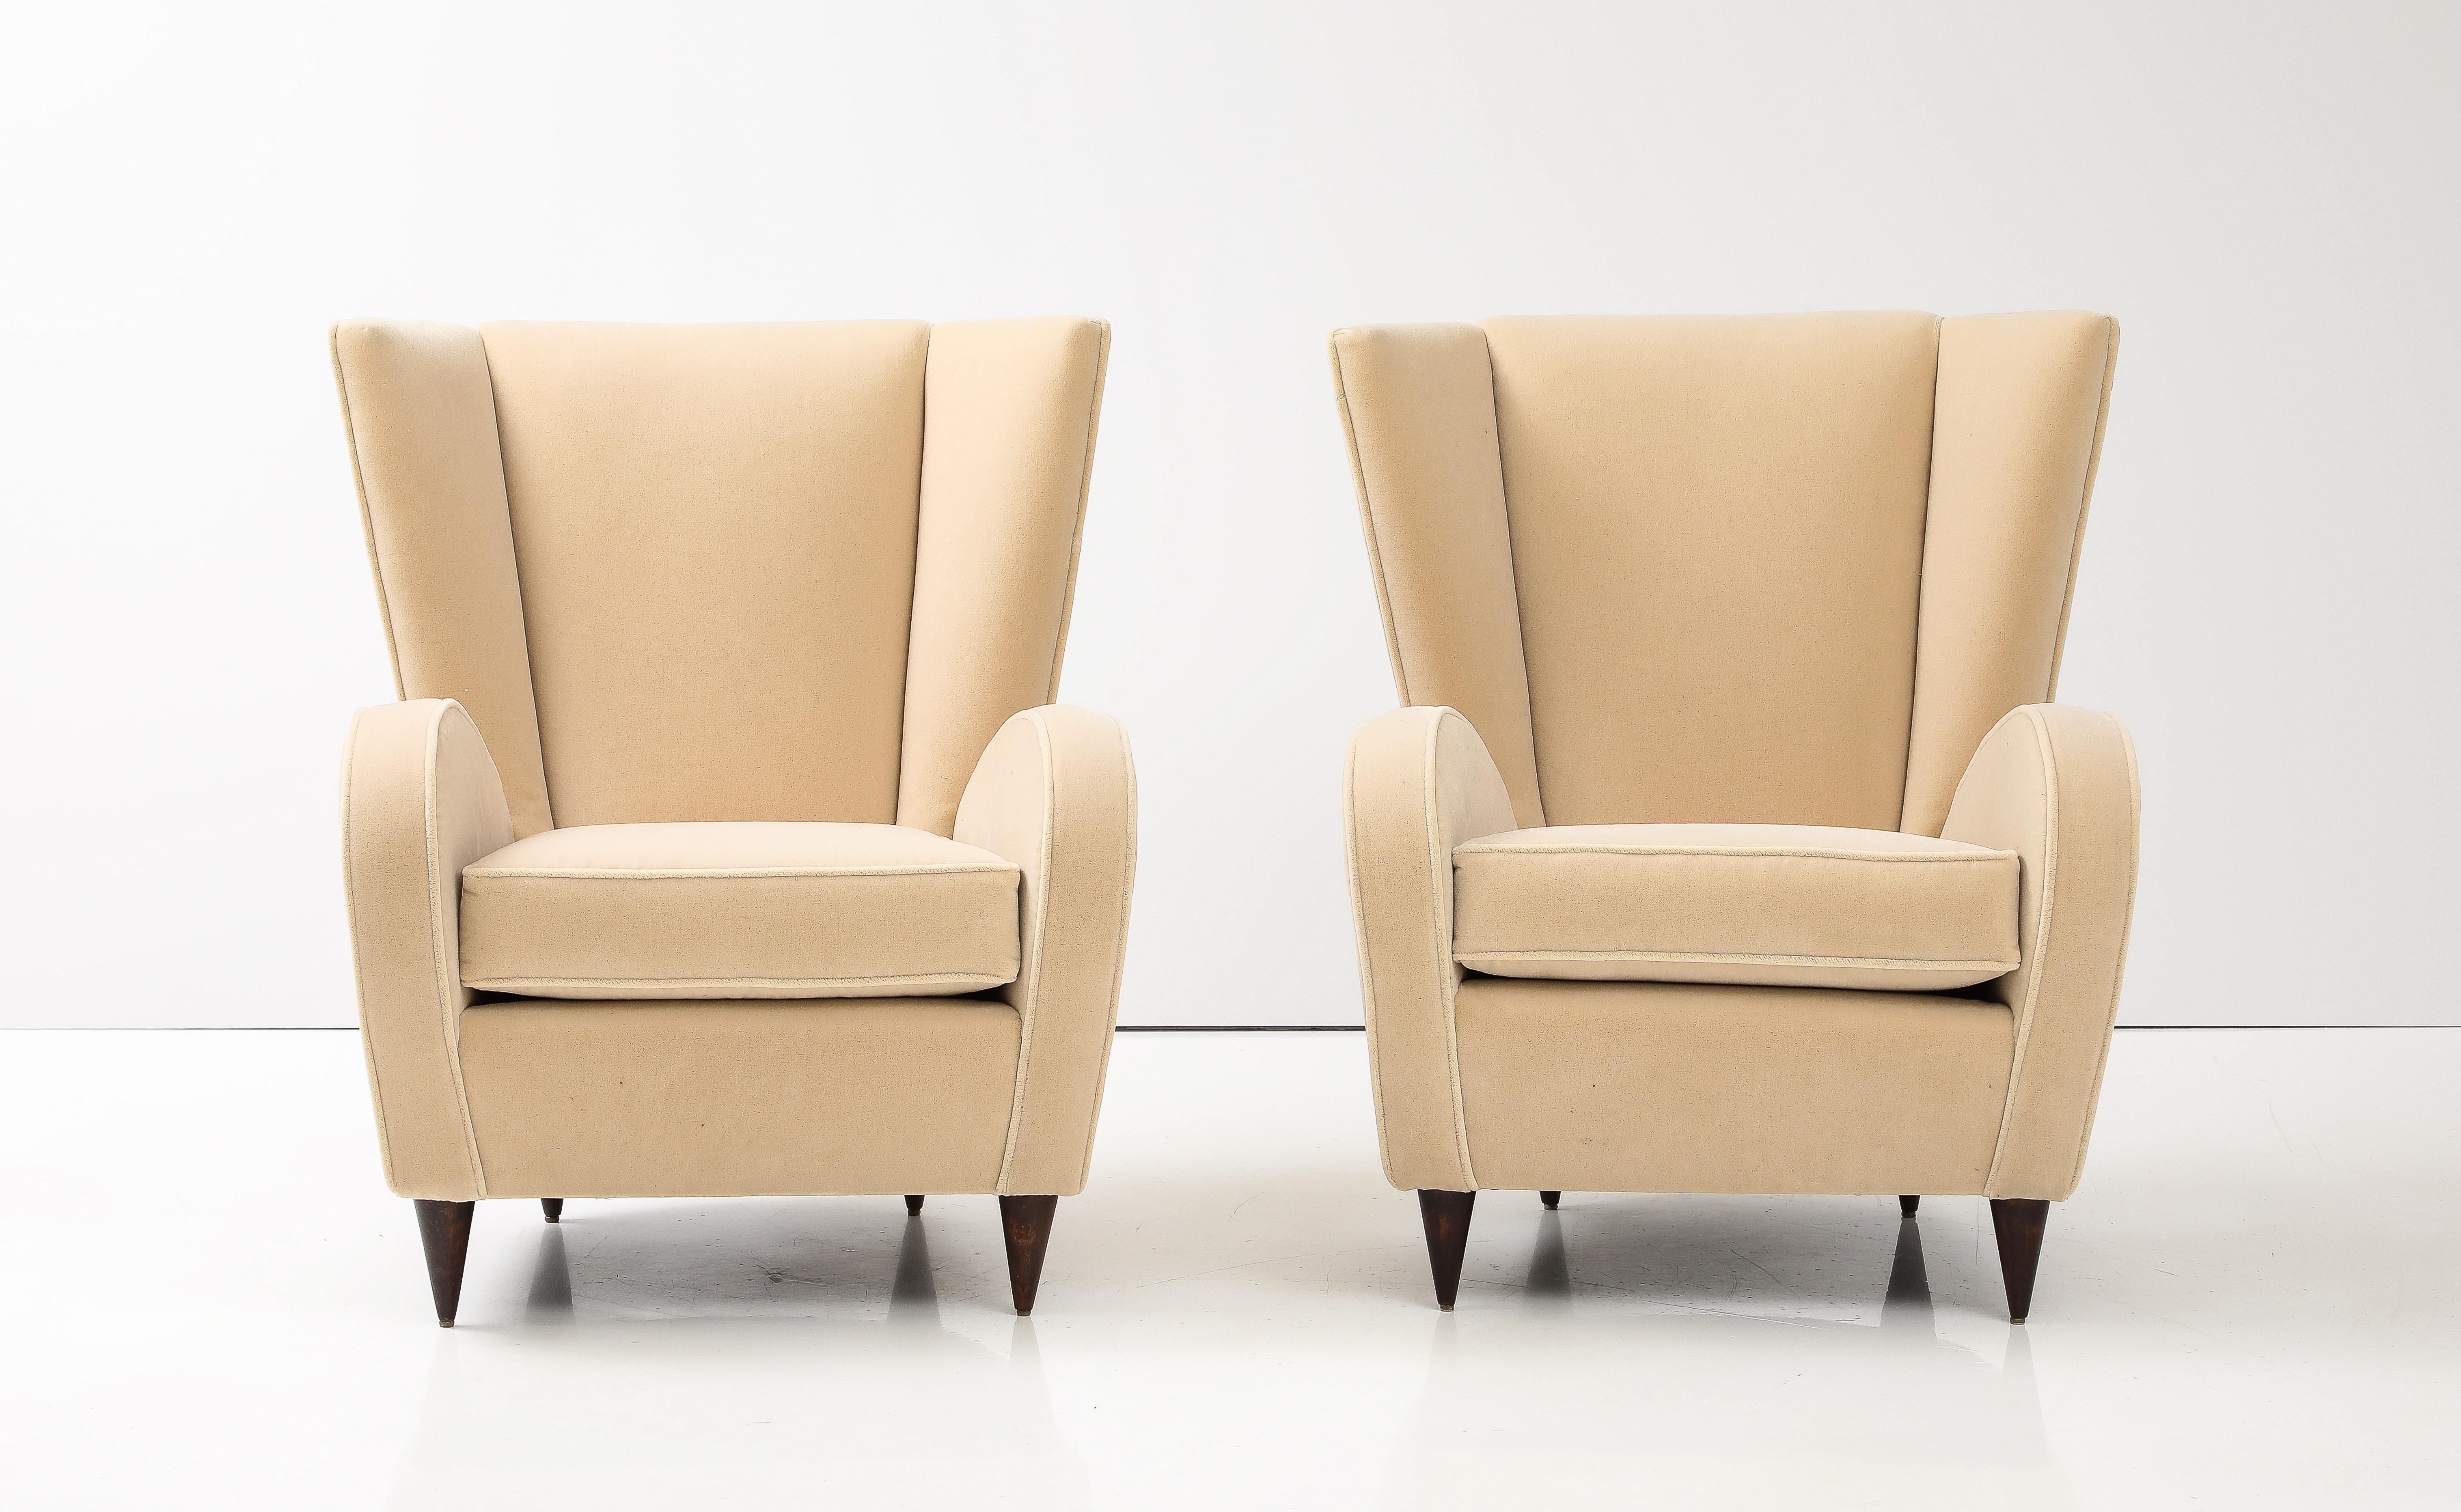  A pair of Paolo Buffa lounge chairs, designed in 1950 for the Hotel Bristol, Merano, an Italian resort. The chairs are indicative of Buffa's signature style, modernist and sleek but with a nod toward the elegant and refined lines of the Neoclassic